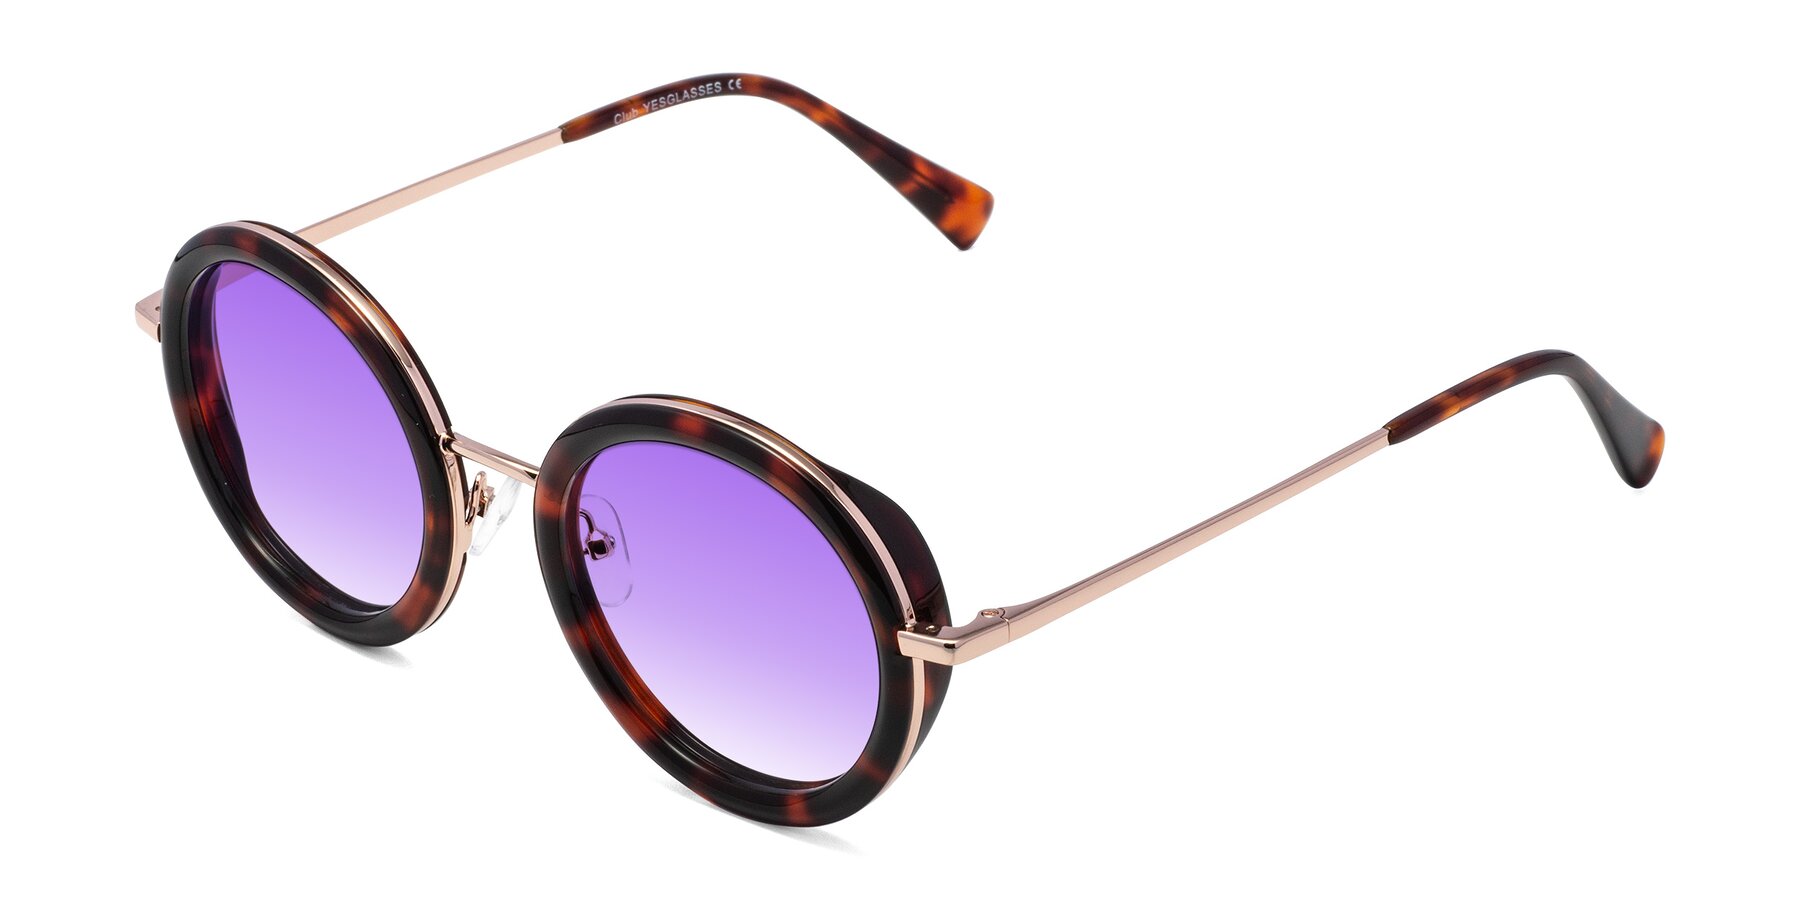 Angle of Club in Tortoise-Rose Gold with Purple Gradient Lenses